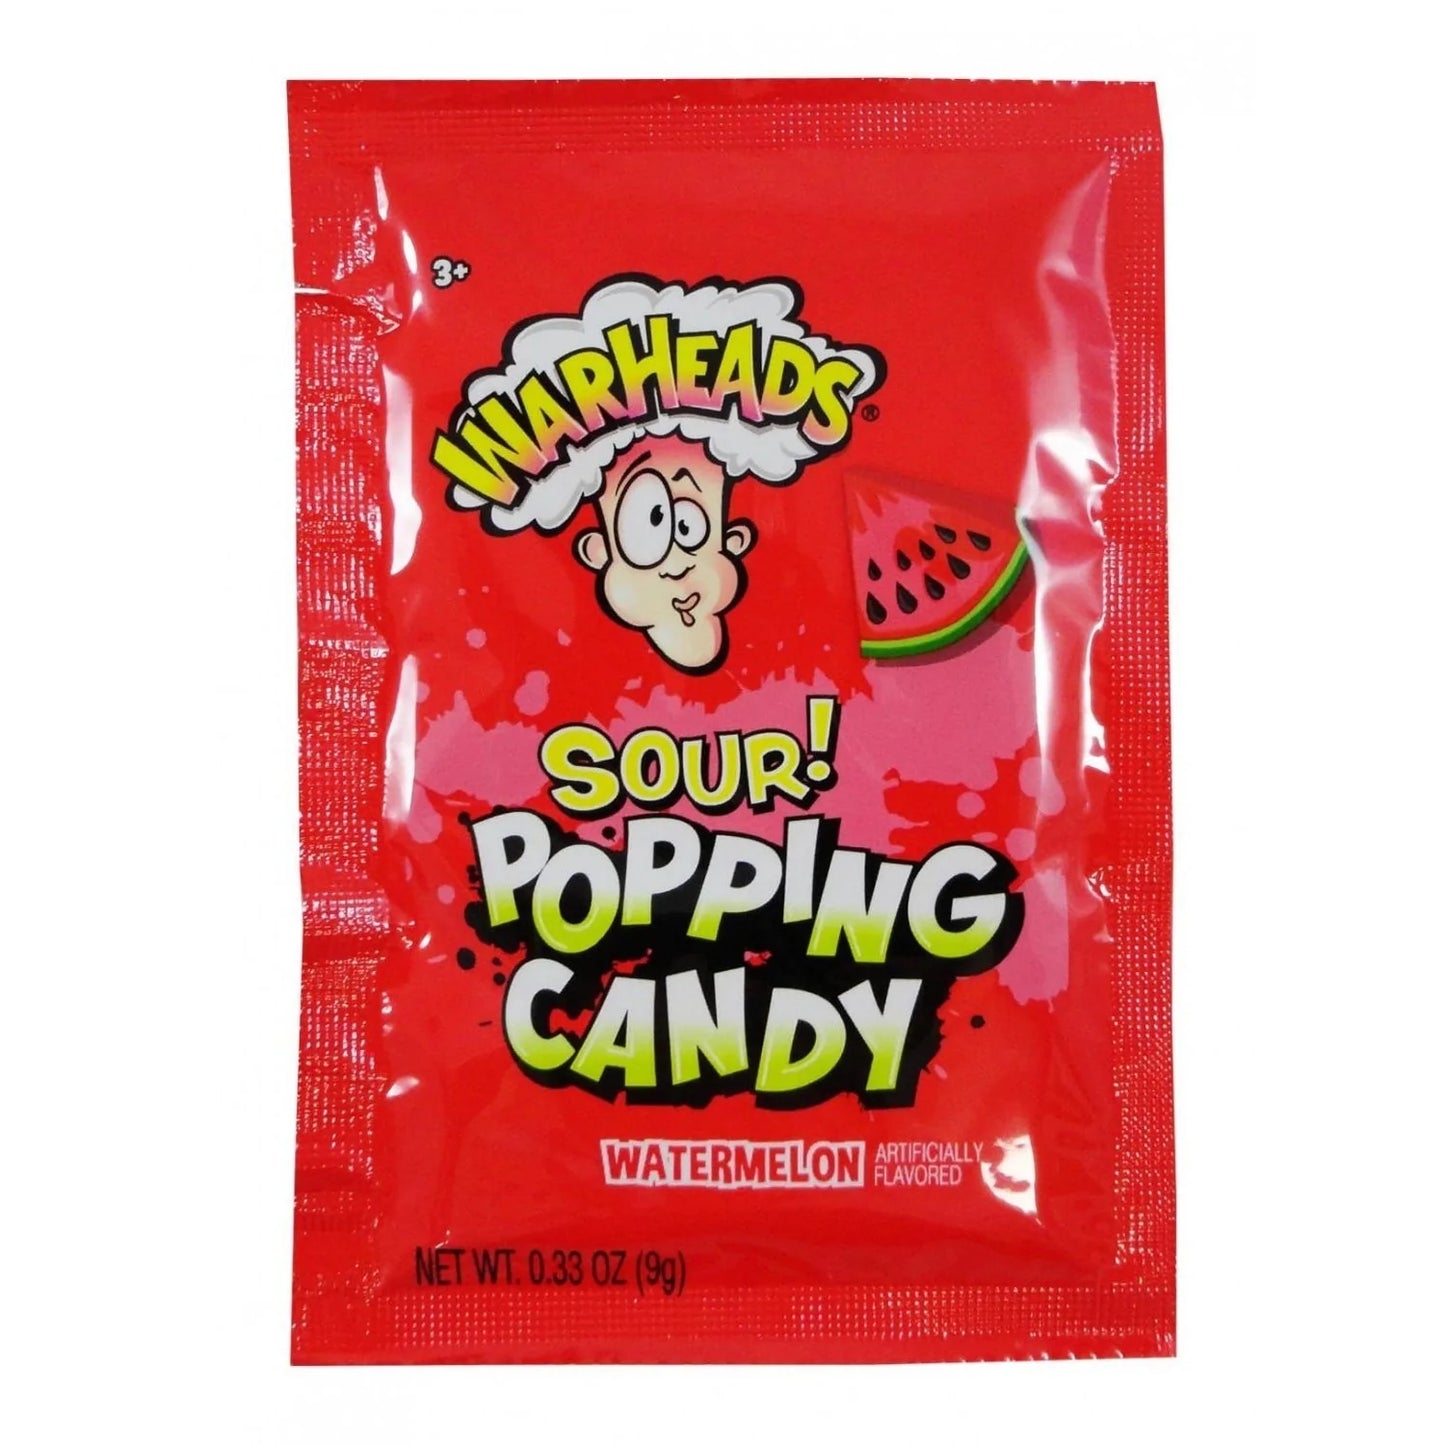 Warheads Sour Popping Candy - Watermelon